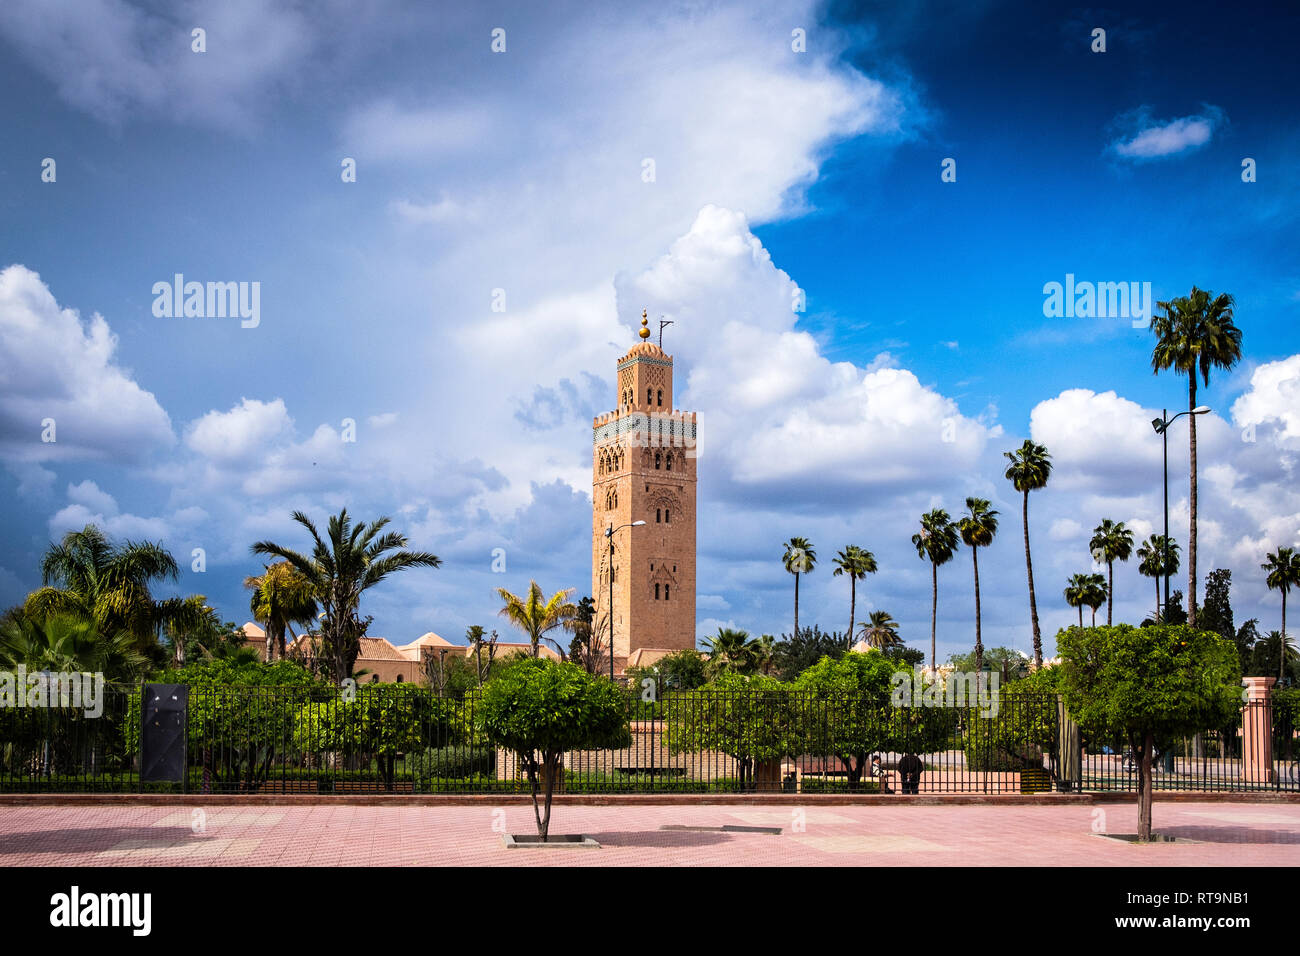 Morocco: Marrakech. The Koutoubia Mosque, built in the XIIth century and reputed to be a pinnacle of Almohad art. *** Local Caption *** Stock Photo